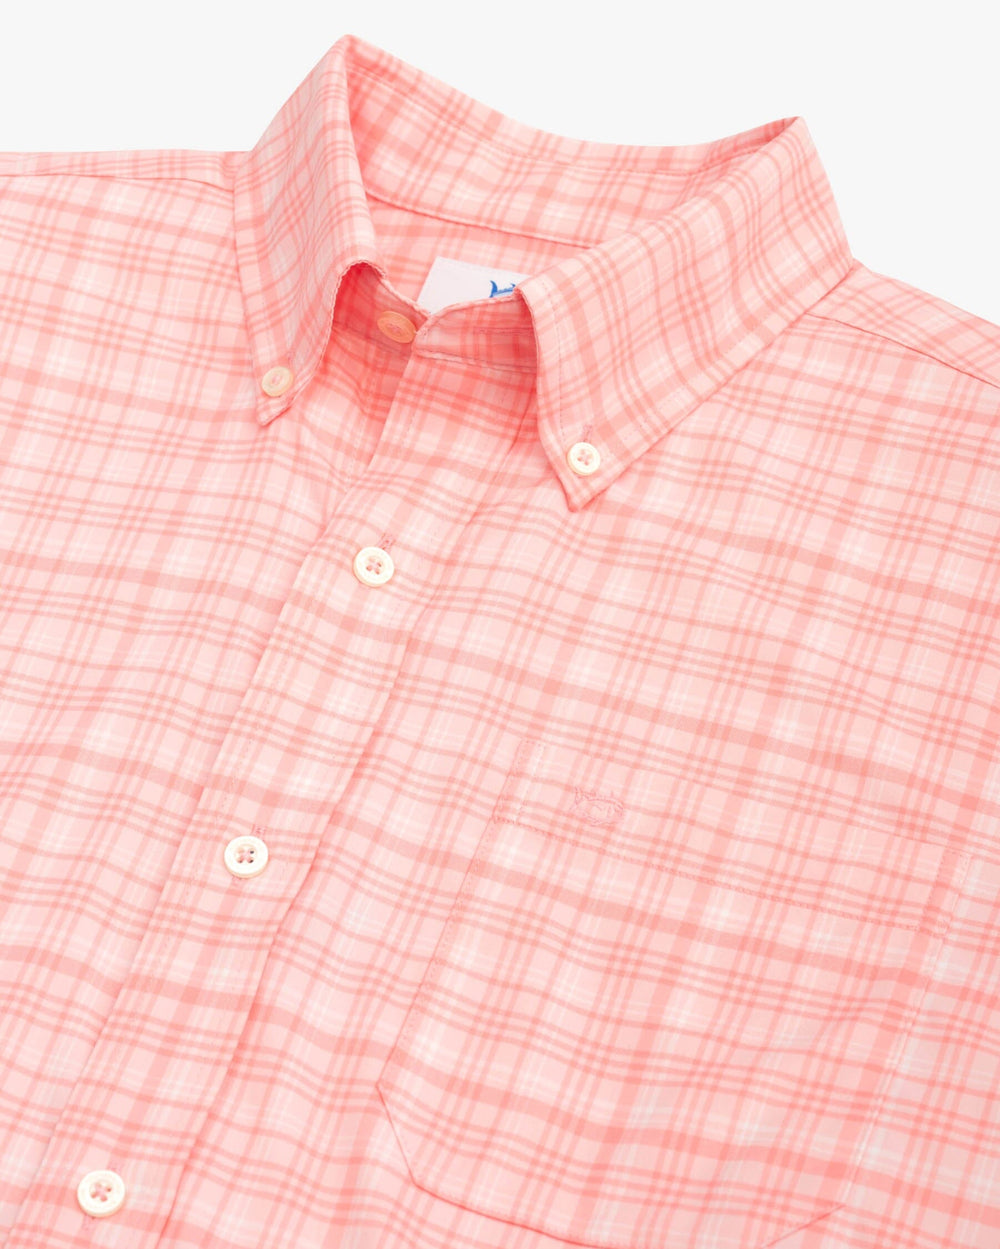 The detail view of the Southern Tide Keowee Plaid Intercoastal Sport Shirt by Southern Tide - Rose Blush